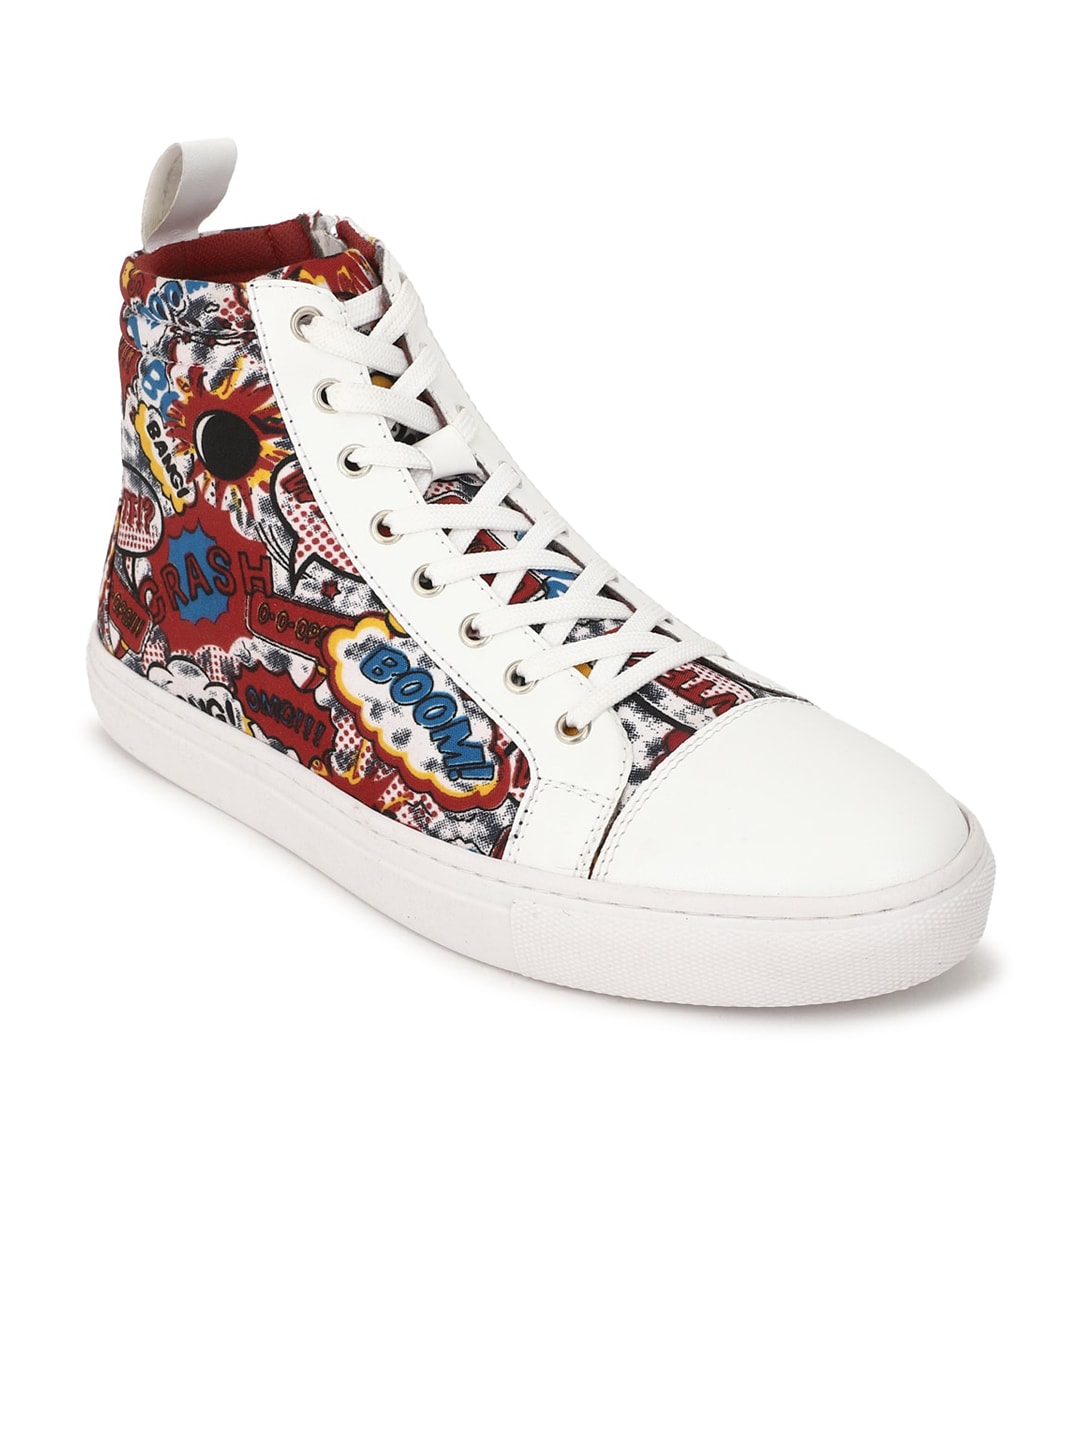 FOREVER 21 Women White Printed PU Sneakers Price in India